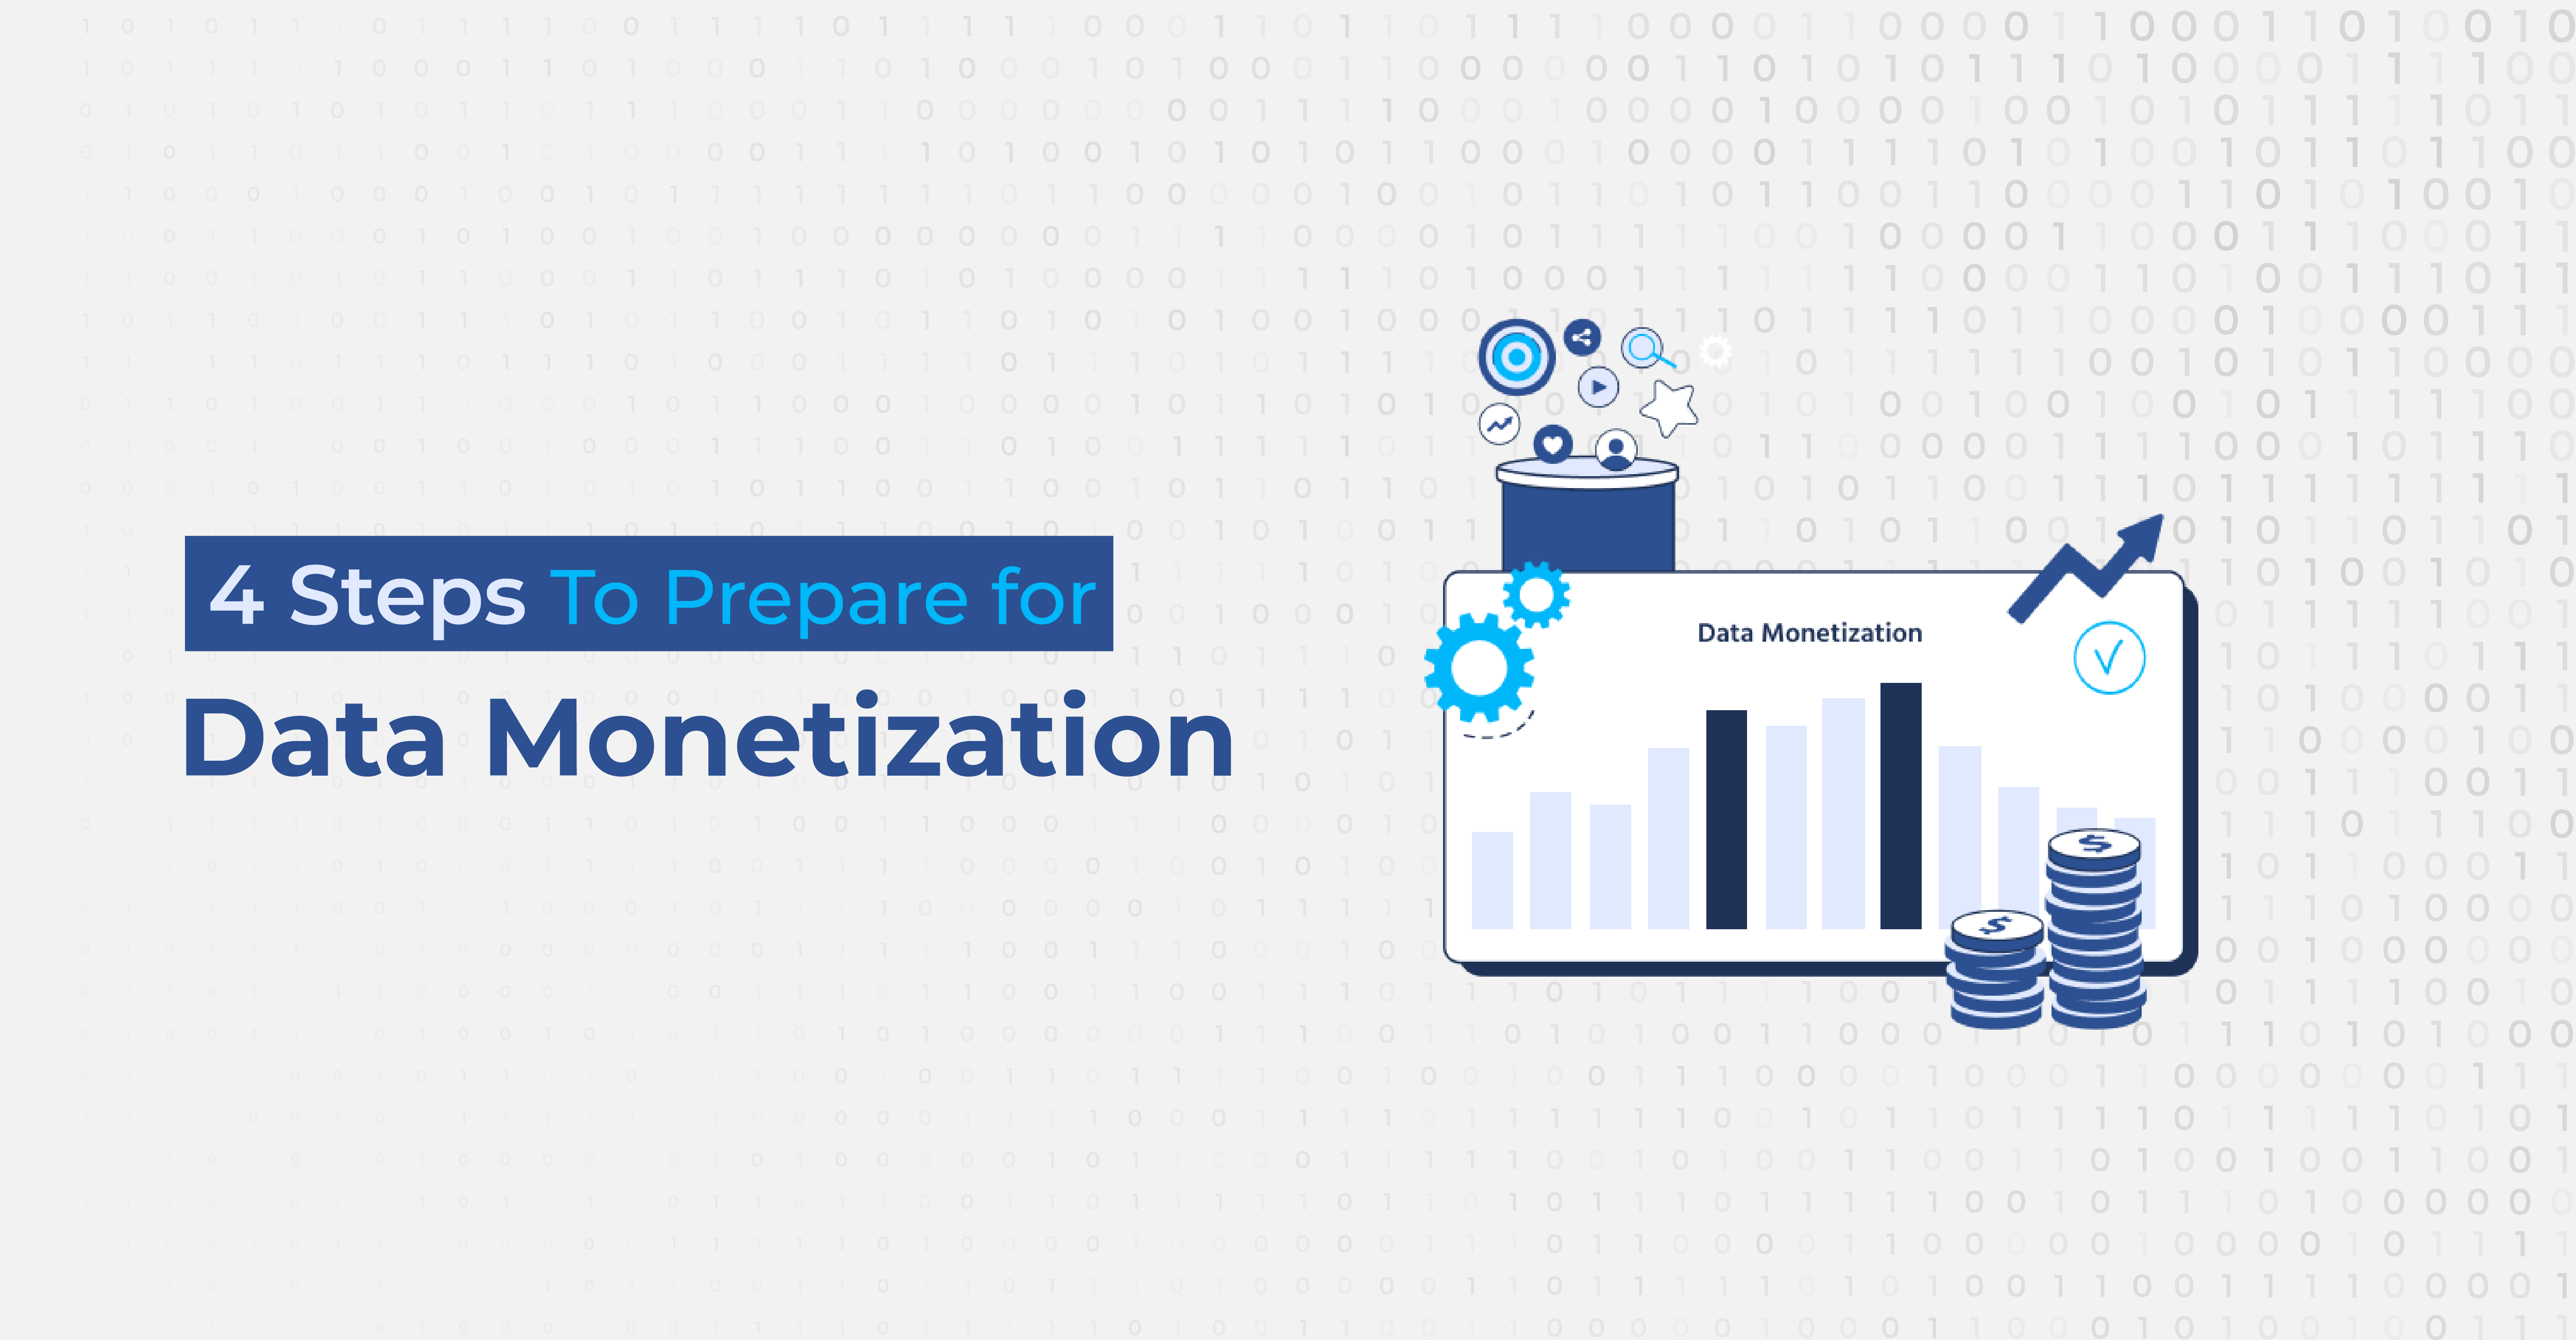 4 Steps To Prepare for Data Monetization